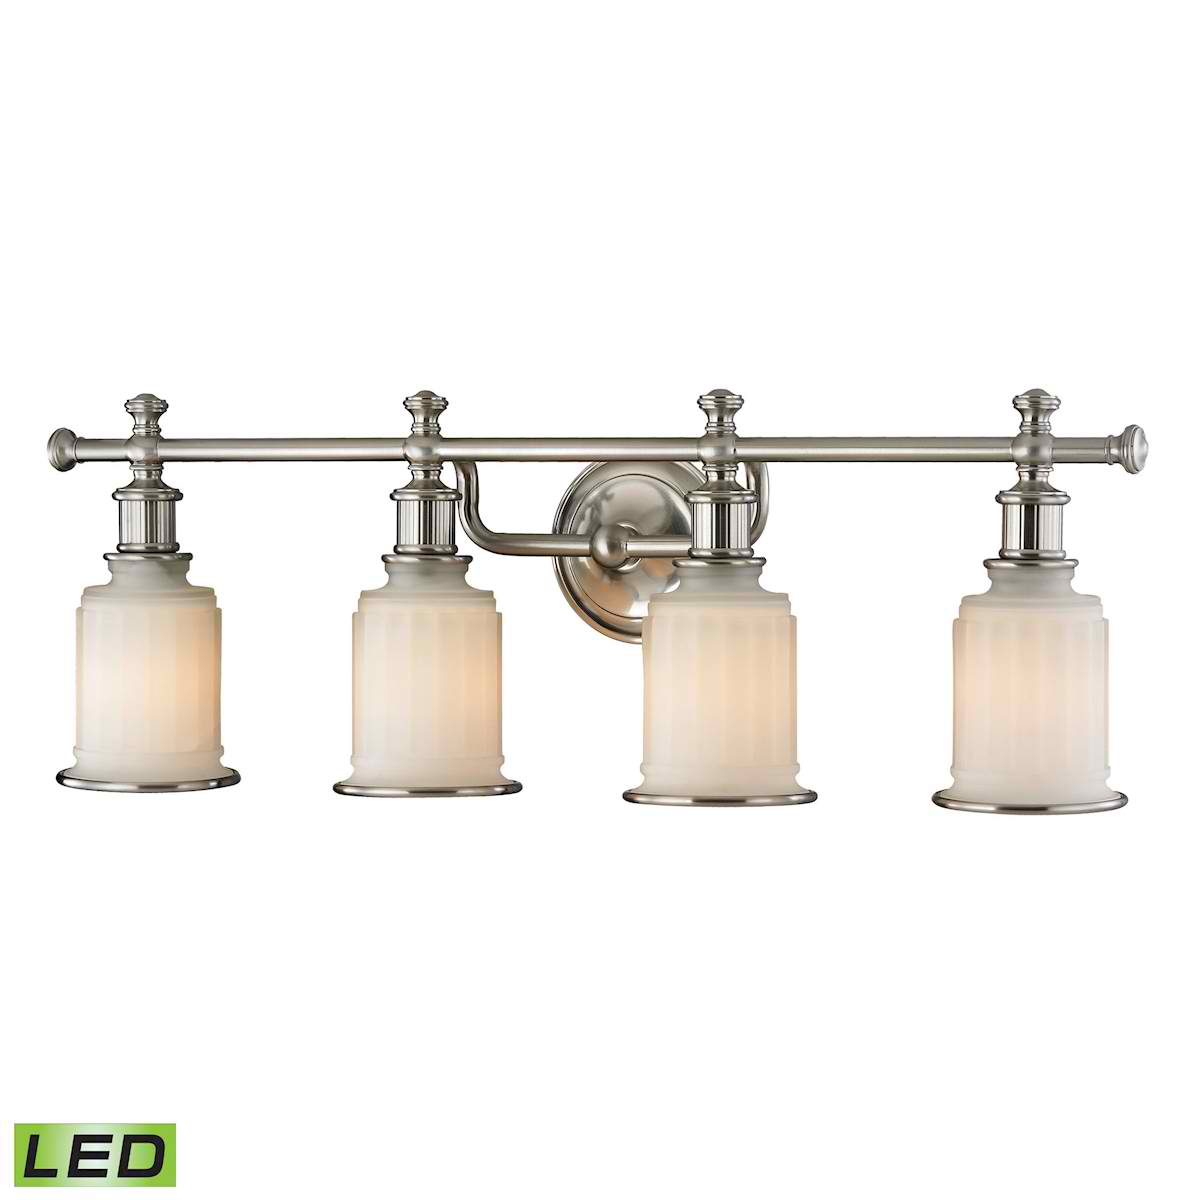 Acadia Collection 4 Light Bath in Brushed Nickel - LED, 800 Lumens (3200 Lumens Total) with Full Scale